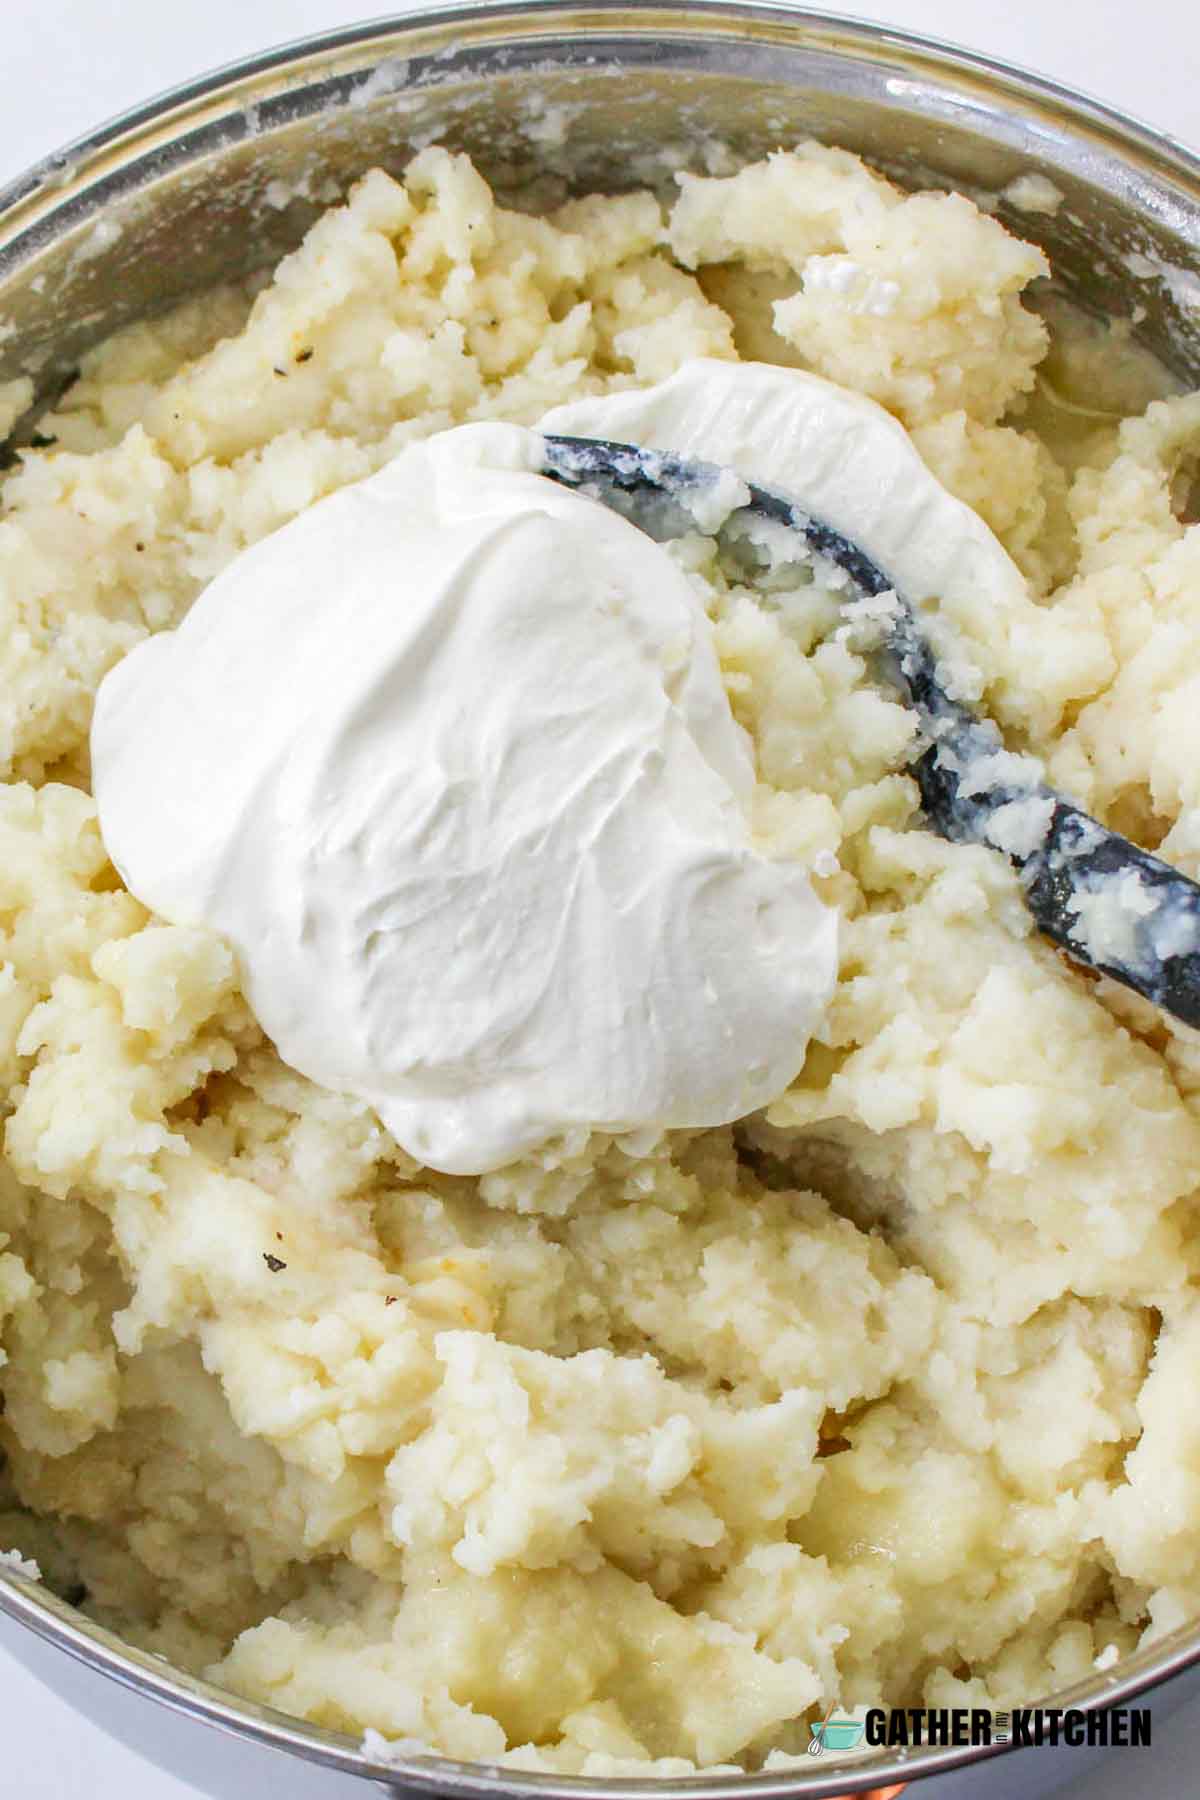 Mashed potatoes mixed with cream cheese.